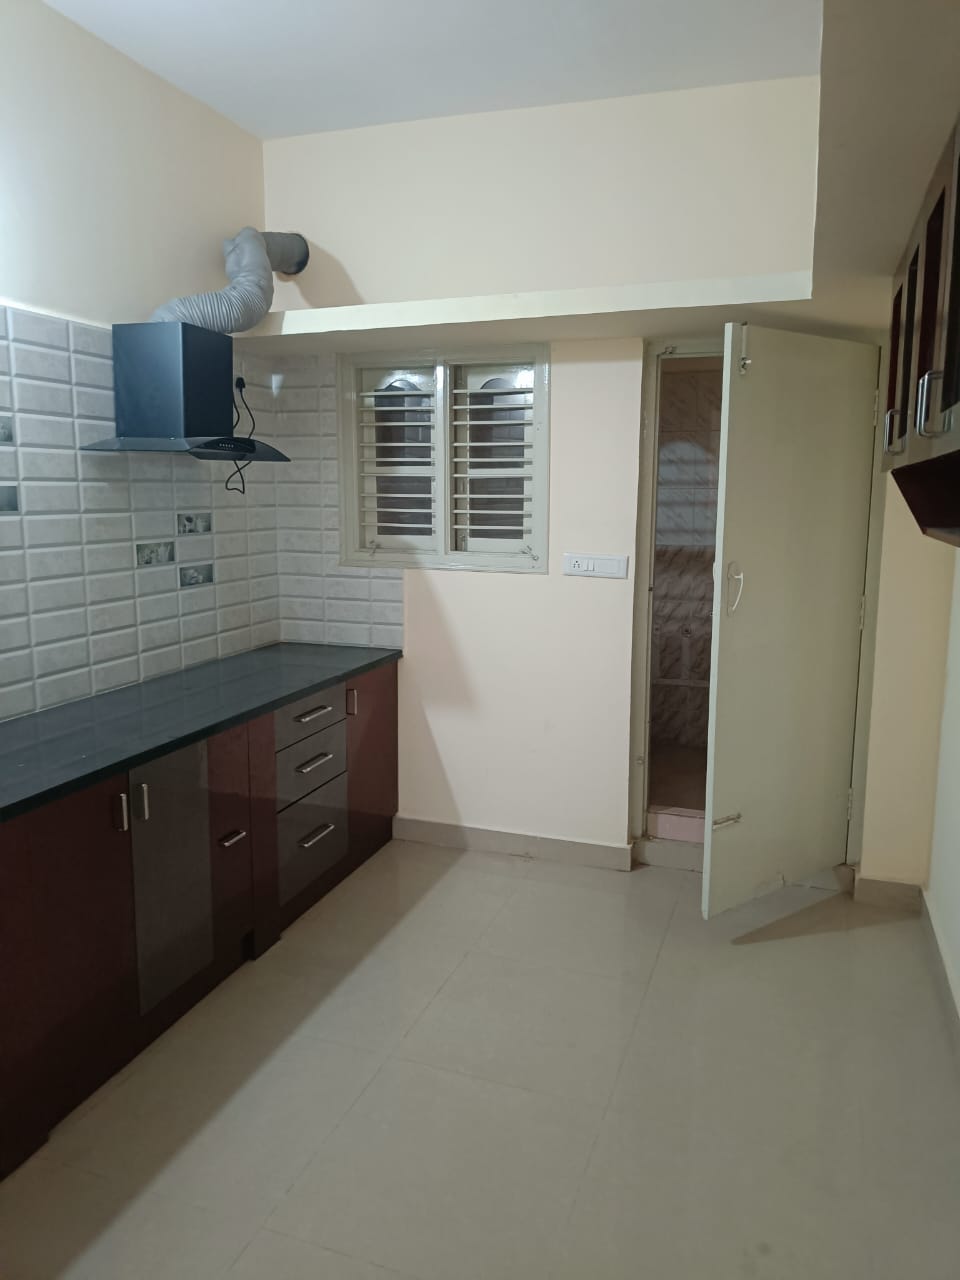 2 BHK Independent House for Lease Only at JAML2 - 2464 in Rajeev Nagar